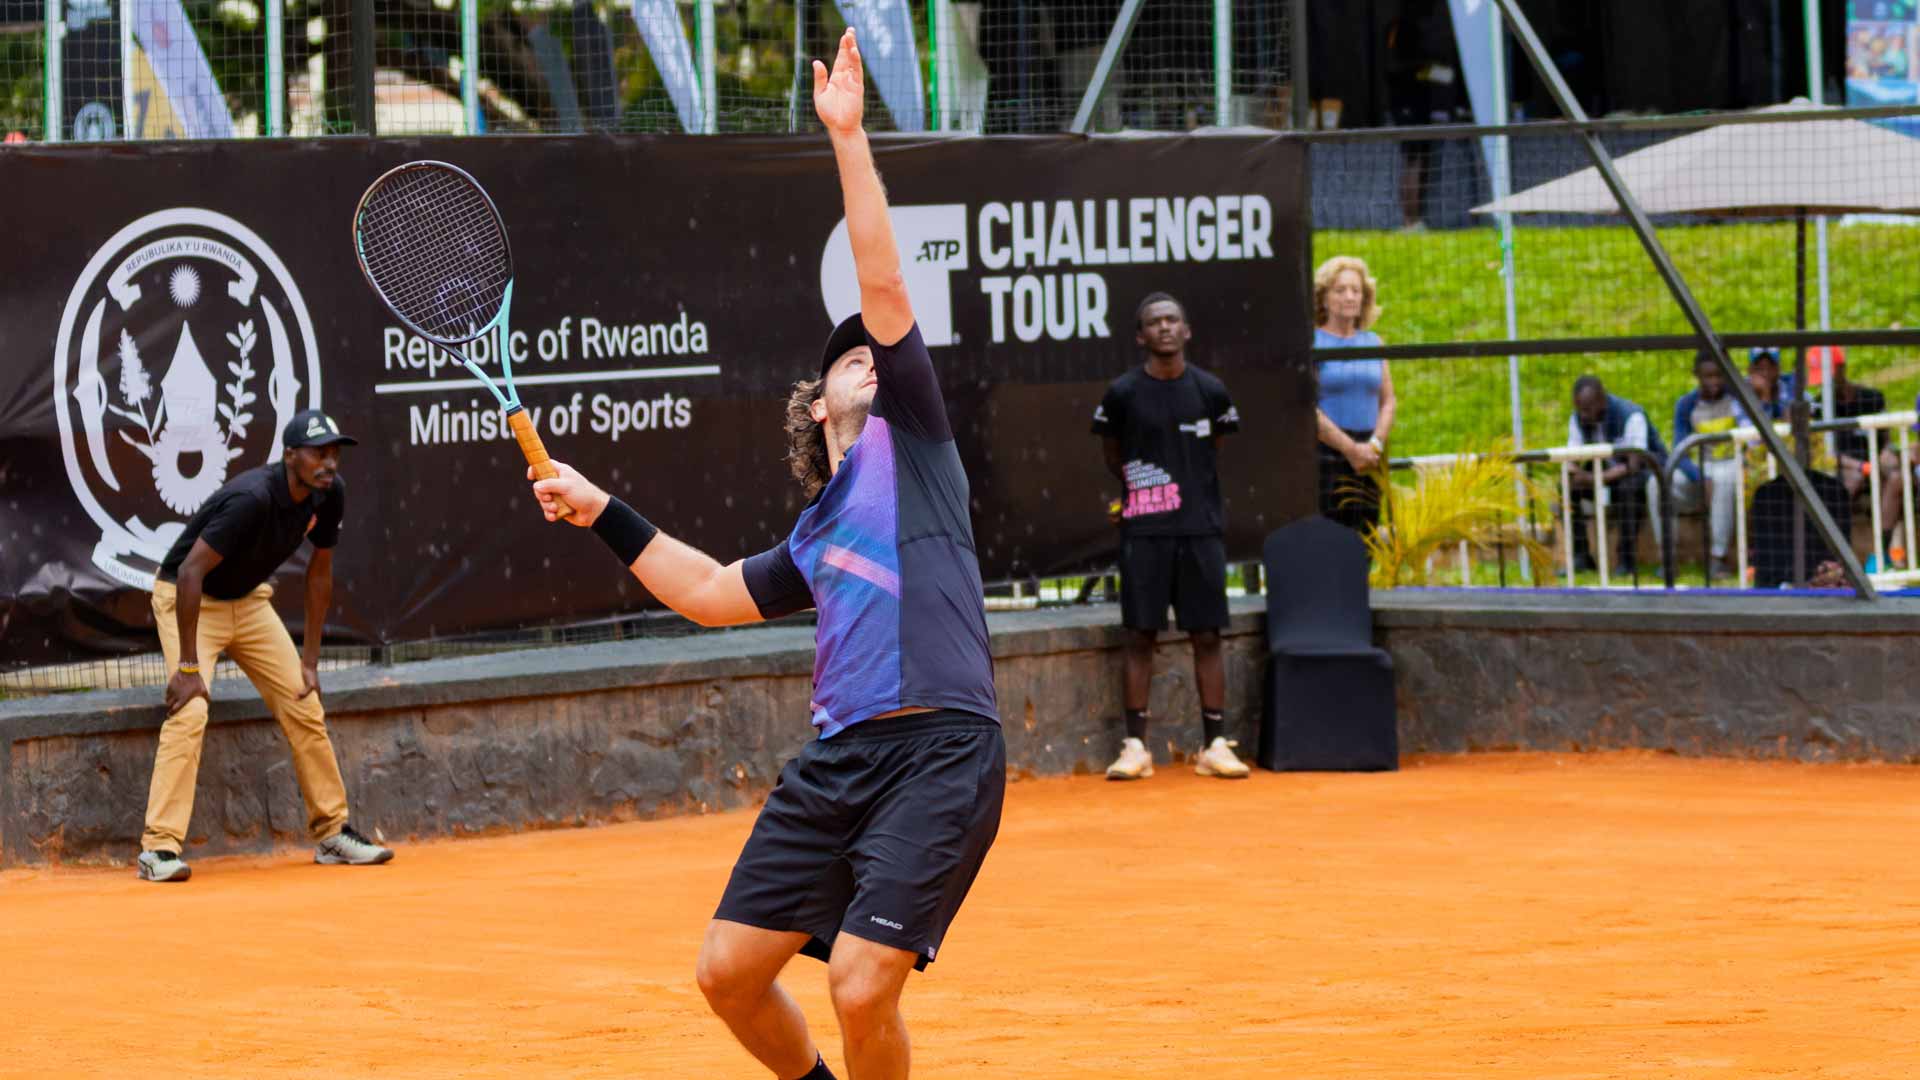 <a href='https://www.atptour.com/en/players/marco-trungelliti/ta29/overview'>Marco Trungelliti</a> in action while his mother Susana looks on.